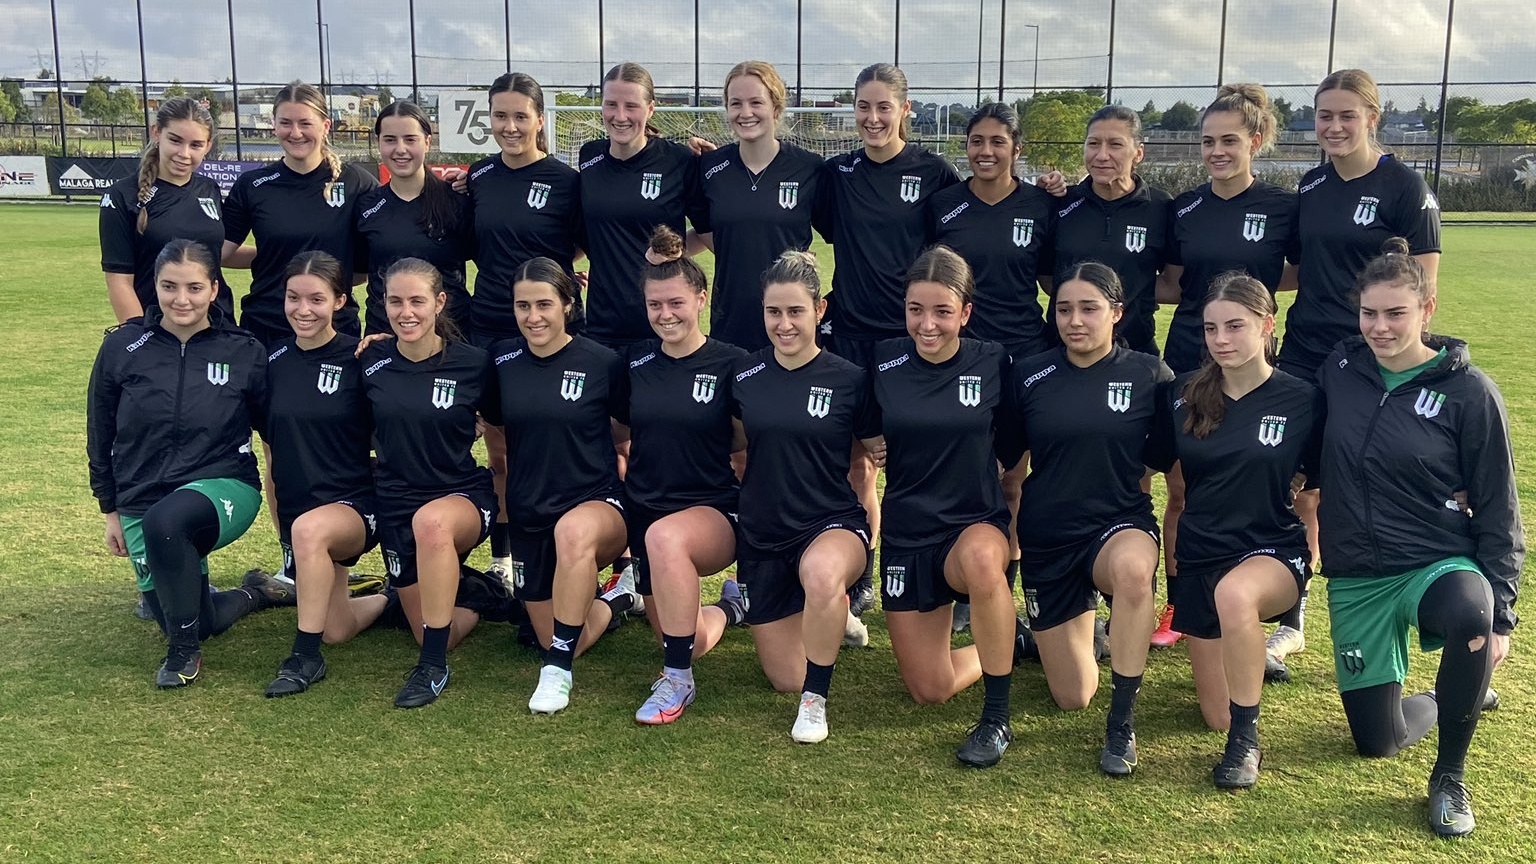 <div>A-League Women to expand - 'This is a special day'</div>